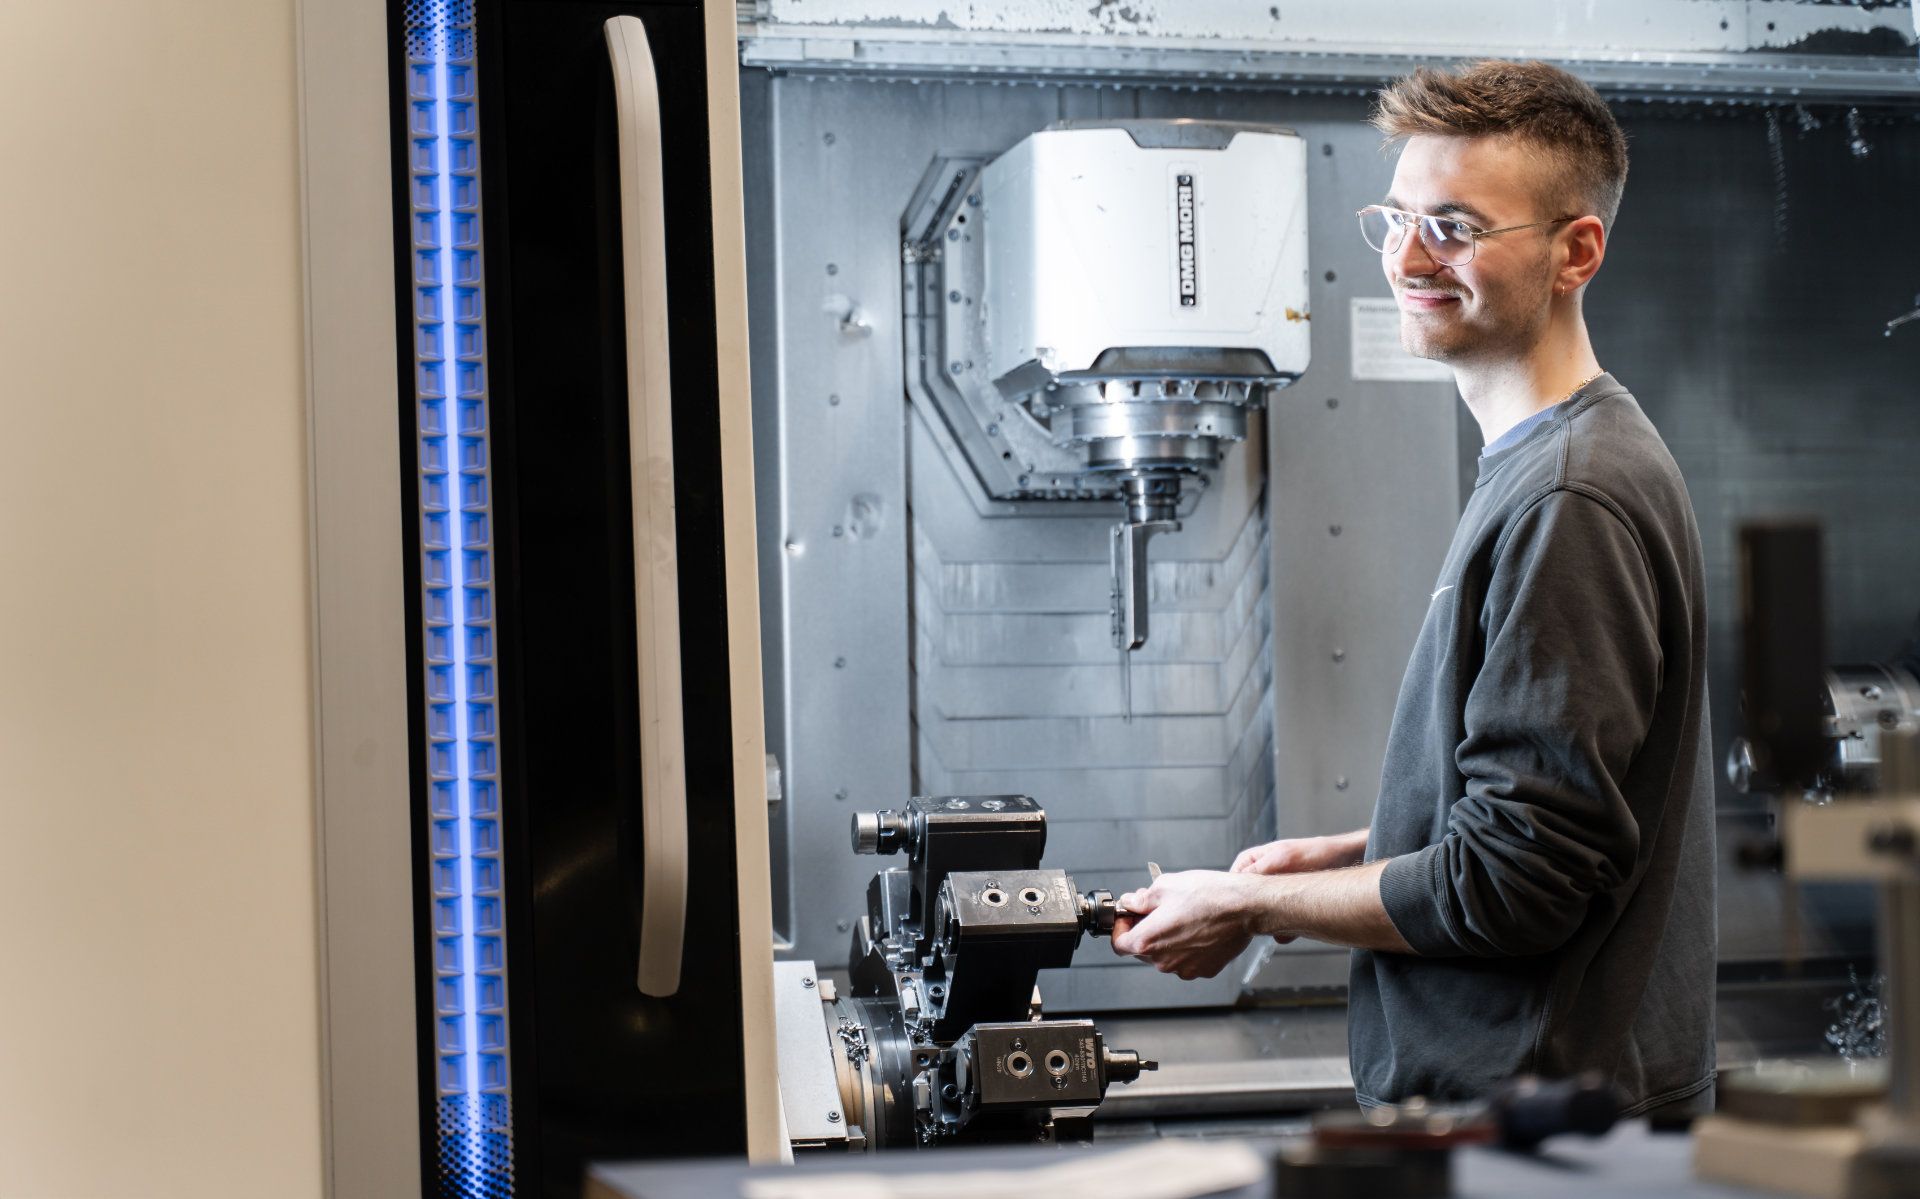 A smiling technician operating precision machinery in a modern industrial environment.